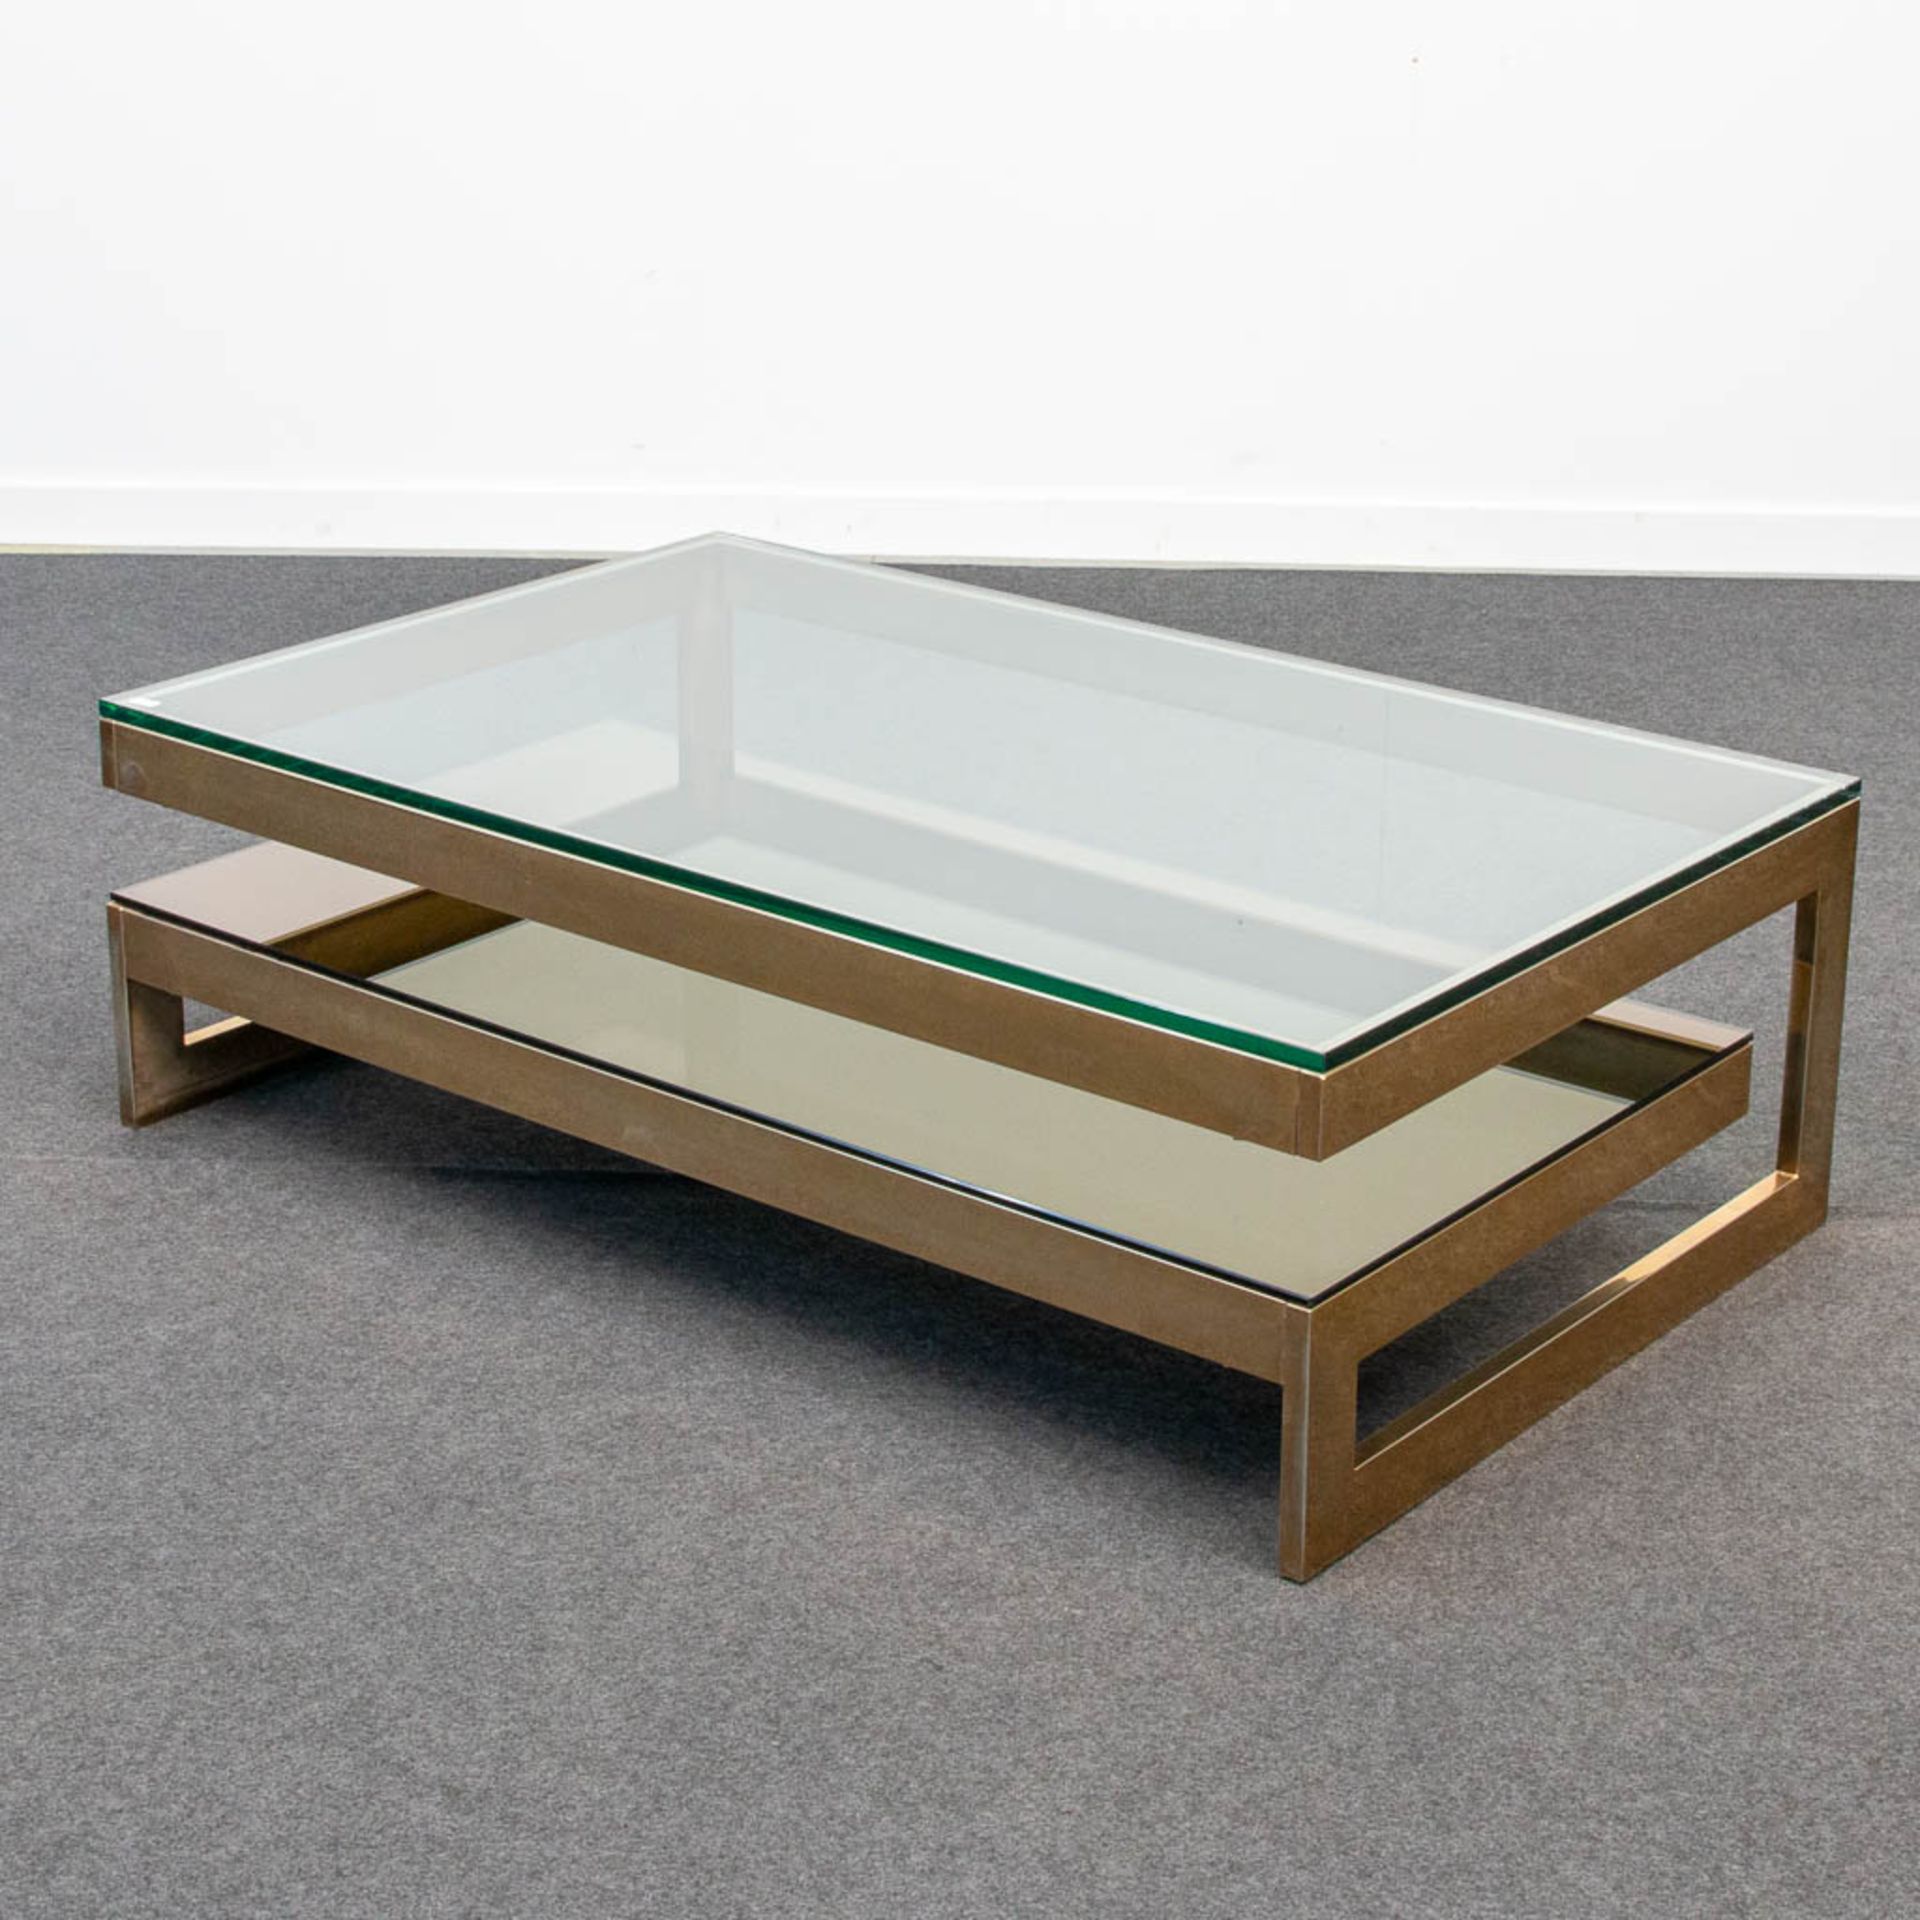 A Belgo-Chrom G-Shape coffee Table with fumé glass and clear glass. 20th century. - Image 12 of 19